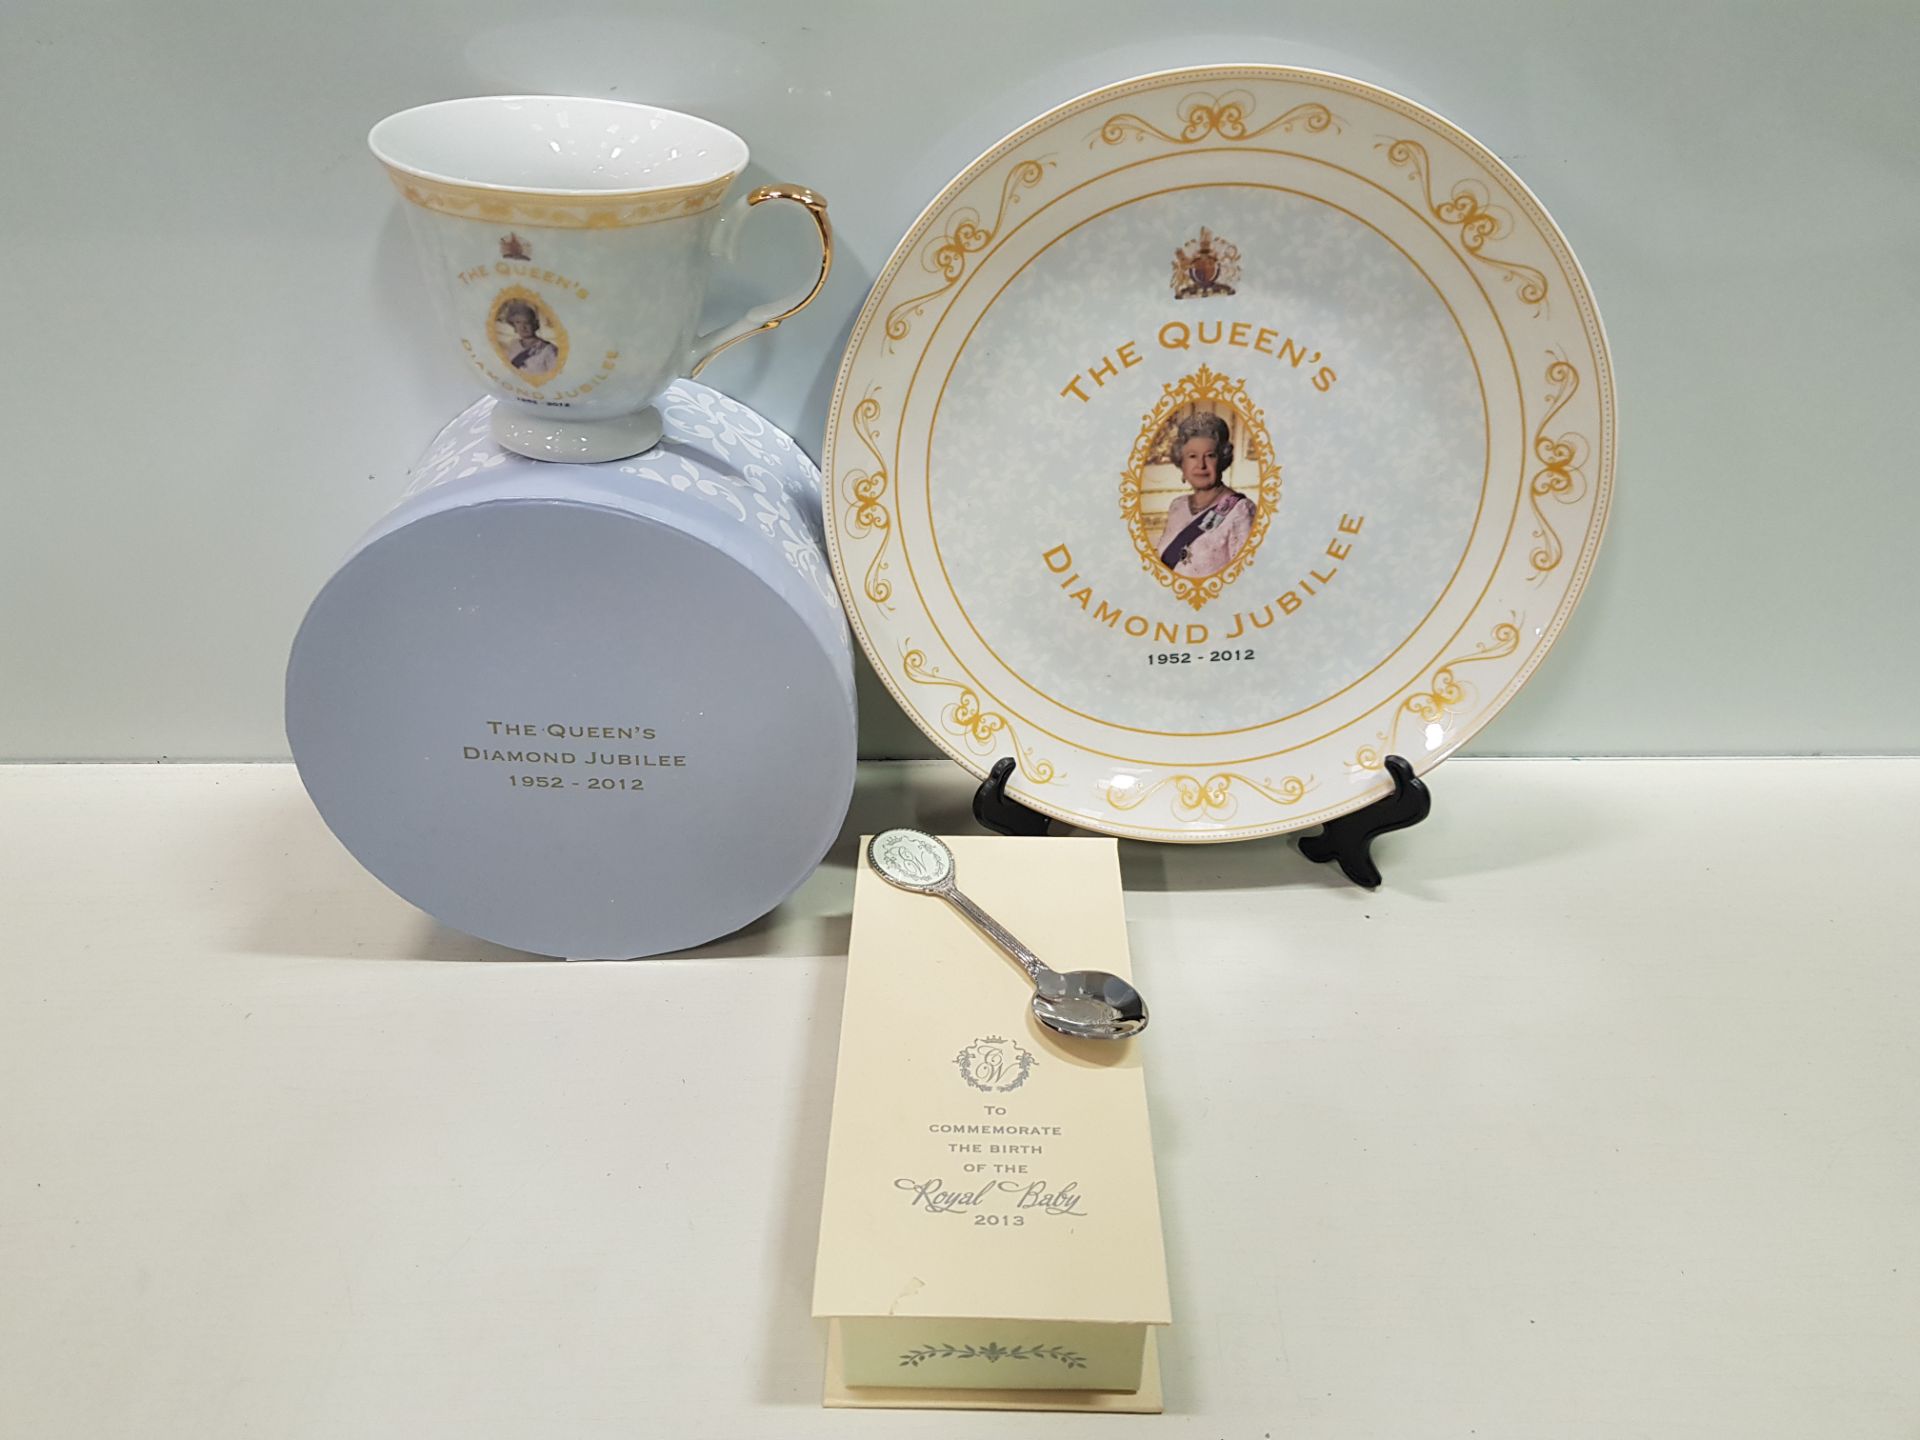 192 X BRAND NEW THE QUEENS DIAMOND JUBILEE COMMEMORATIVE PLATE ON A STAND - IN 24 BOXES PLUS 69 X